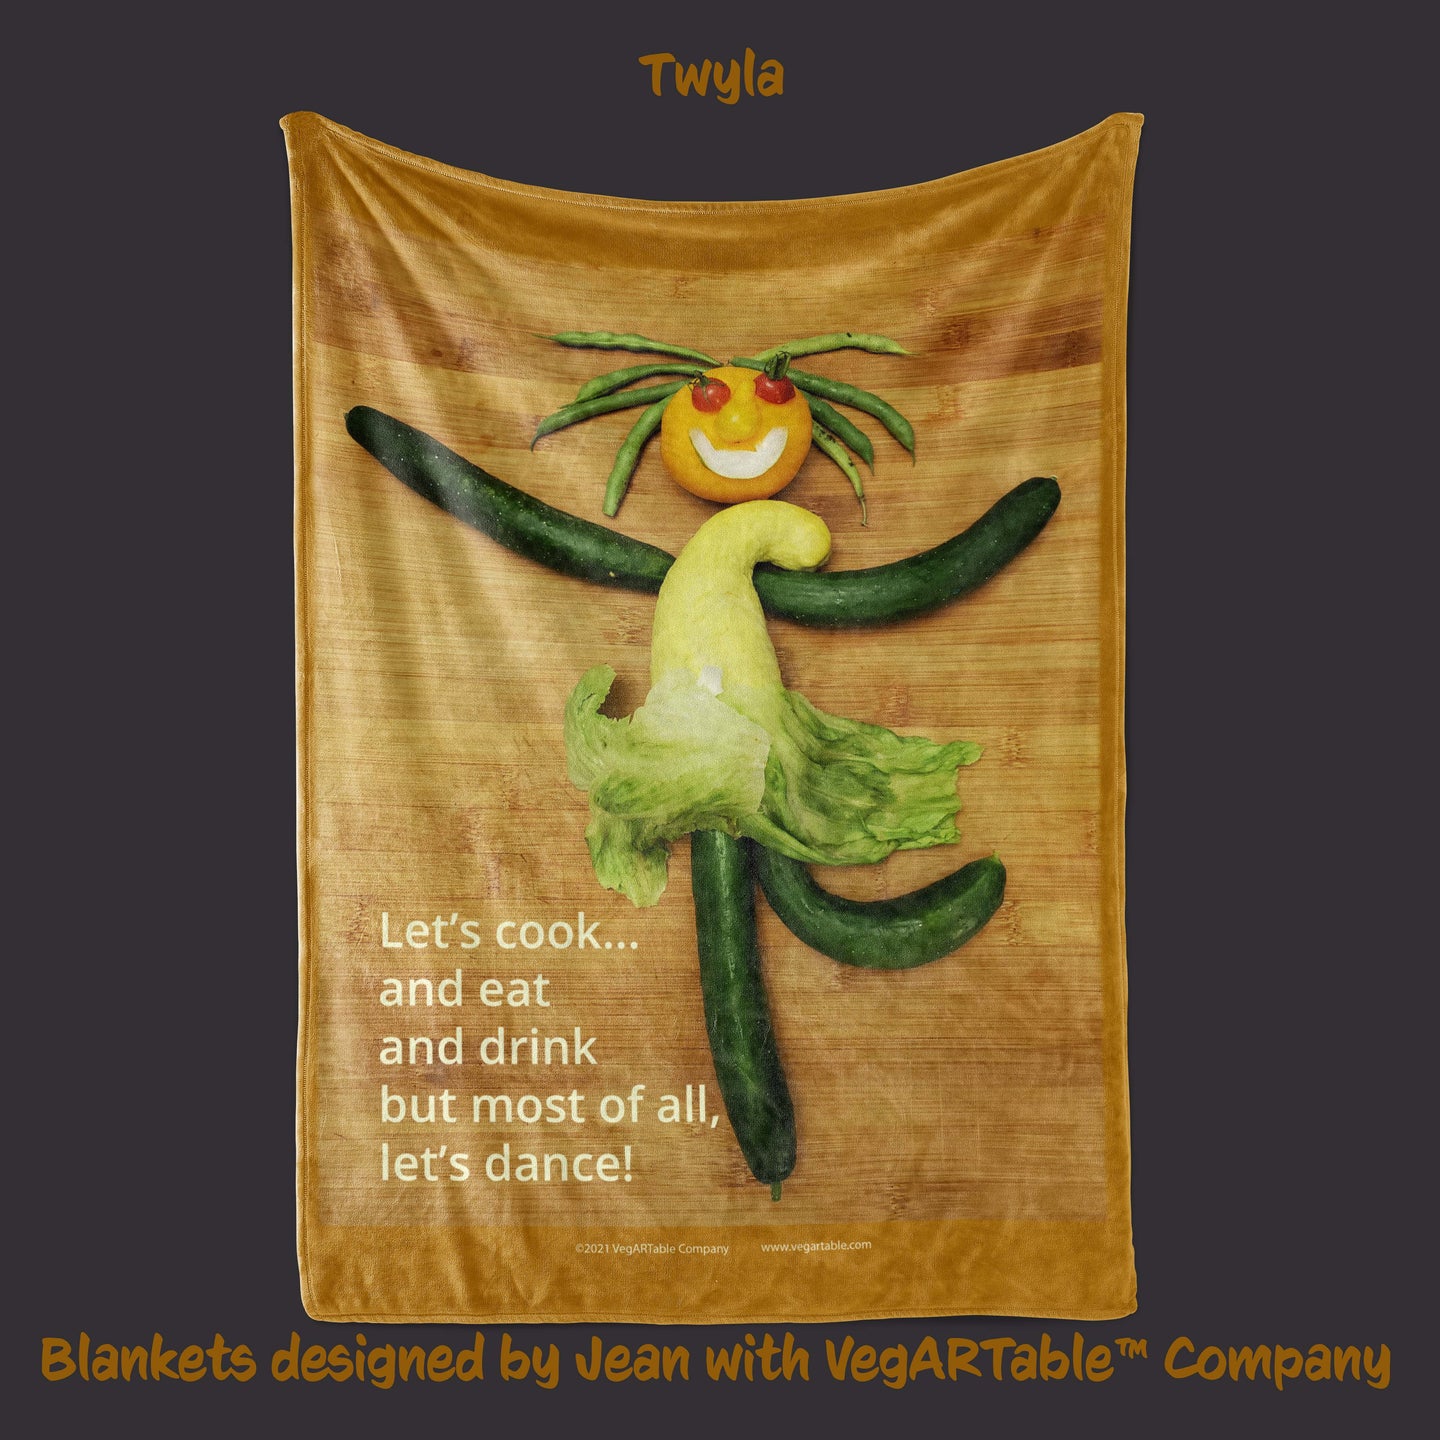 Twyla Blanket designed by Jean with VegARTable™ Company